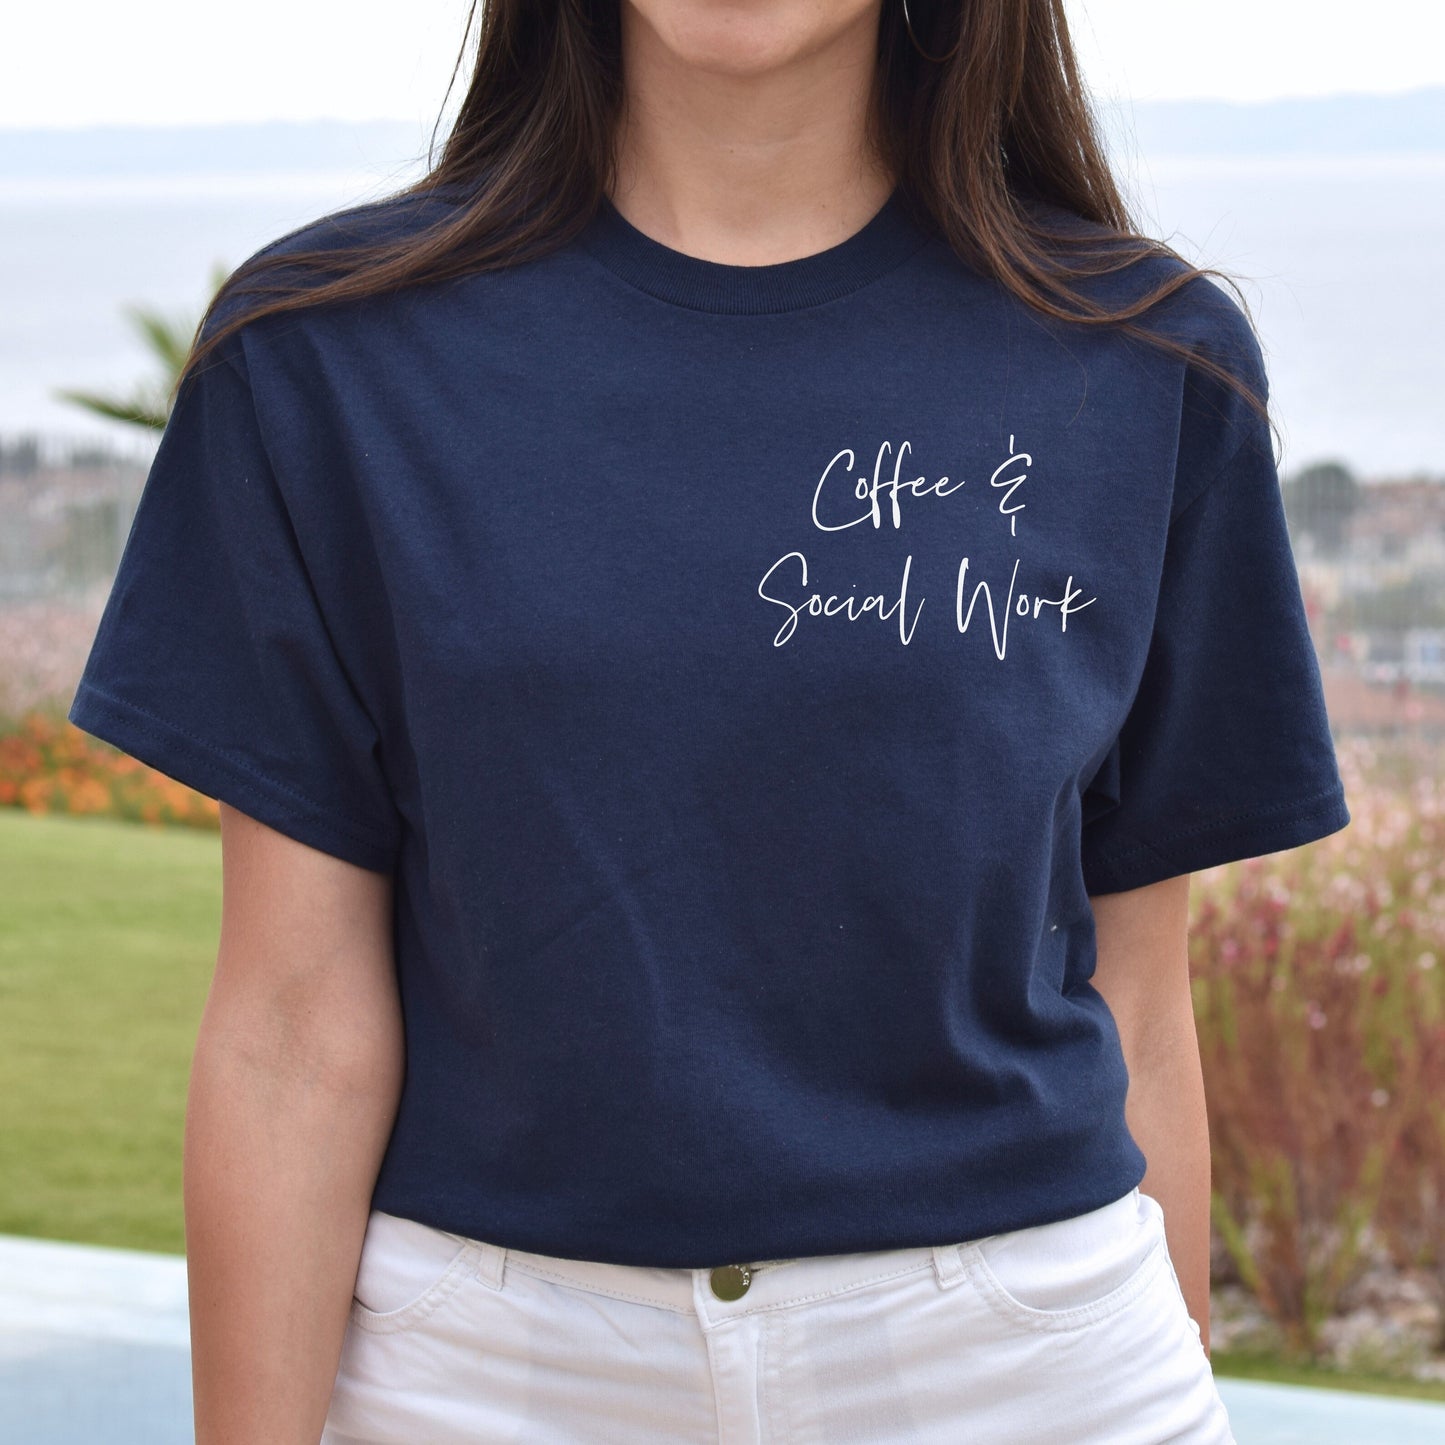 Coffee and Social work pocket Unisex T-shirt social worker tee Black Navy Dark Heather-Navy-Family-Gift-Planet